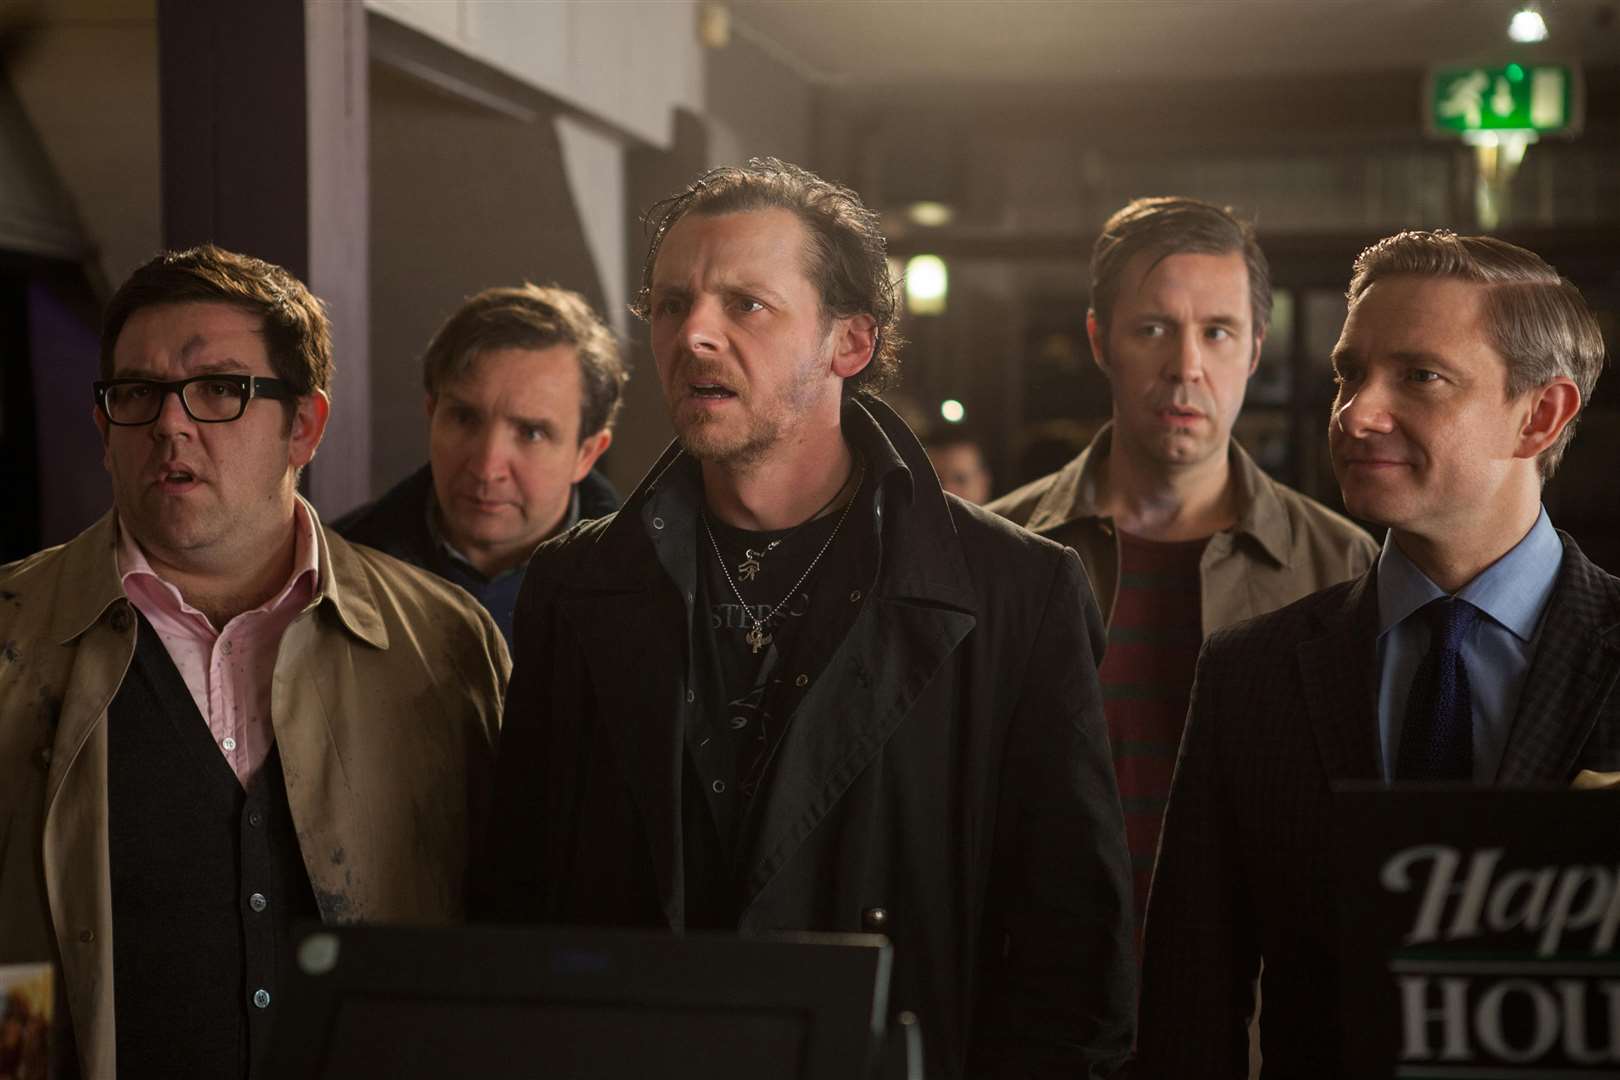 The World's End with Nick Frost as Andrew Knightley, Eddie Marsan as Peter, Simon Pegg as Gary King, Paddy Considine as Steven and Martin Freeman as Oliver. Picture: PA Photo/UPI Media.